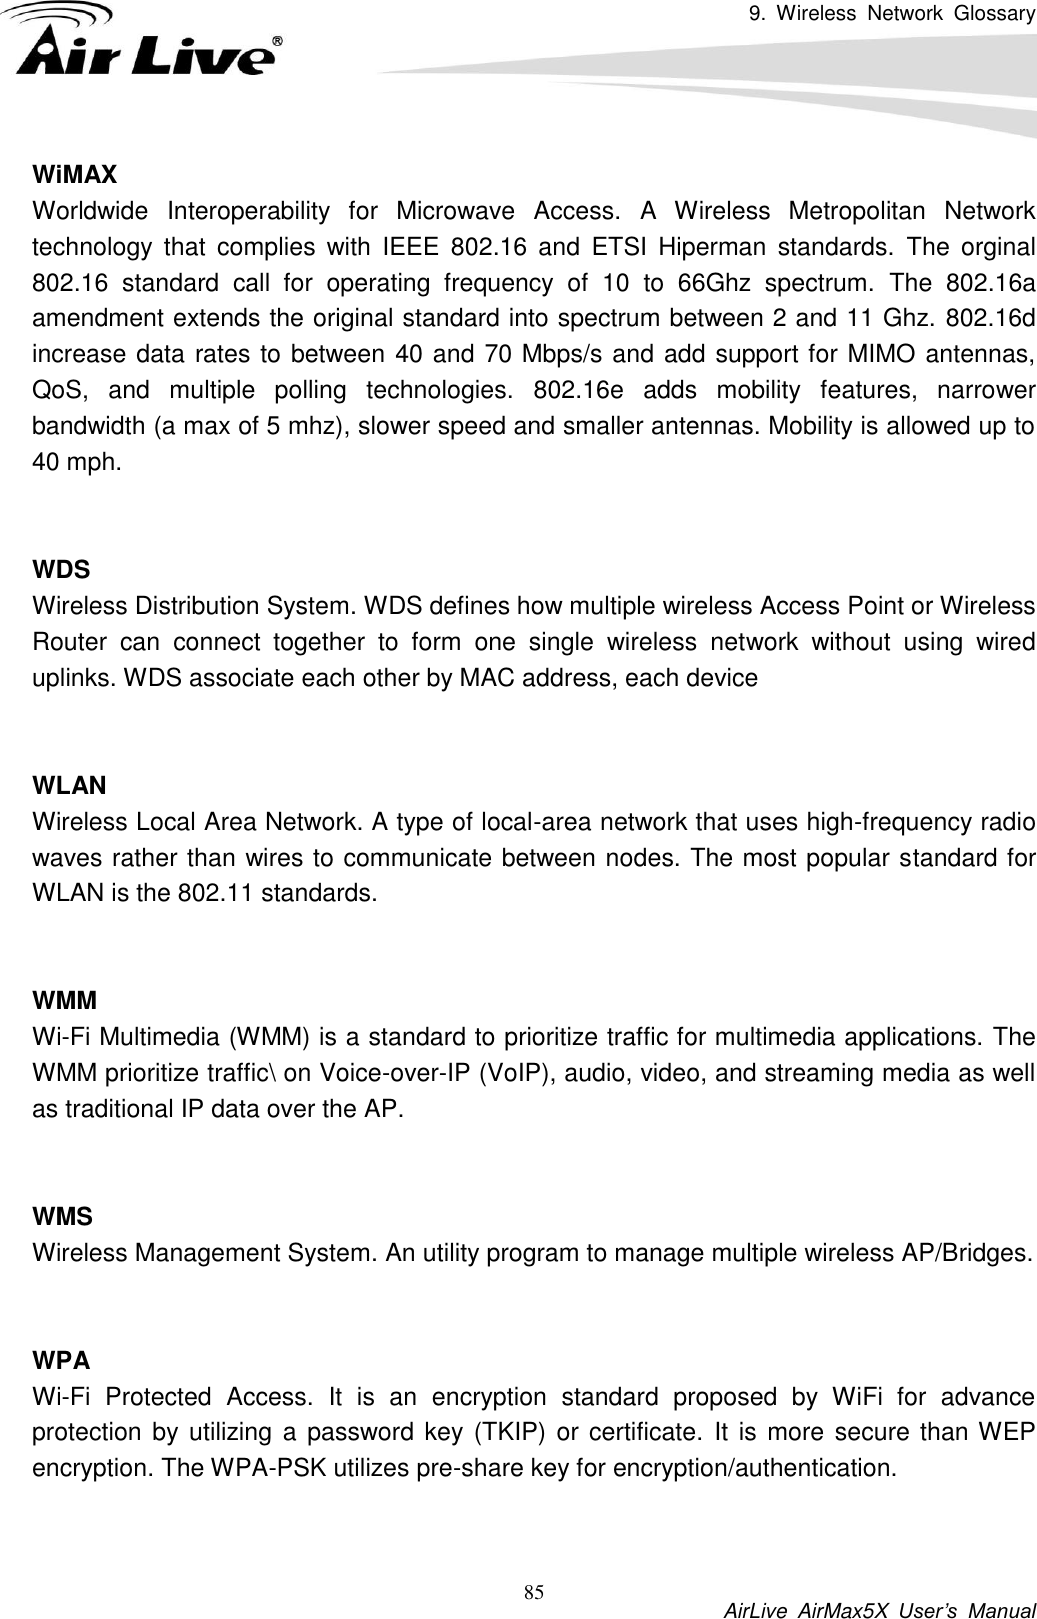 9.  Wireless  Network  Glossary           AirLive  AirMax5X  User’s  Manual 85 WiMAX Worldwide  Interoperability  for  Microwave  Access.  A  Wireless  Metropolitan  Network technology  that  complies  with  IEEE  802.16  and  ETSI  Hiperman  standards.  The  orginal 802.16  standard  call  for  operating  frequency  of  10  to  66Ghz  spectrum.  The  802.16a amendment extends the original standard into spectrum between 2 and 11 Ghz. 802.16d increase data rates to between 40 and 70 Mbps/s and add support for MIMO antennas, QoS,  and  multiple  polling  technologies.  802.16e  adds  mobility  features,  narrower bandwidth (a max of 5 mhz), slower speed and smaller antennas. Mobility is allowed up to 40 mph.     WDS Wireless Distribution System. WDS defines how multiple wireless Access Point or Wireless Router  can  connect  together  to  form  one  single  wireless  network  without  using  wired uplinks. WDS associate each other by MAC address, each device     WLAN Wireless Local Area Network. A type of local-area network that uses high-frequency radio waves rather than wires to communicate between nodes. The most popular standard for WLAN is the 802.11 standards.   WMM Wi-Fi Multimedia (WMM) is a standard to prioritize traffic for multimedia applications. The WMM prioritize traffic\ on Voice-over-IP (VoIP), audio, video, and streaming media as well as traditional IP data over the AP.   WMS Wireless Management System. An utility program to manage multiple wireless AP/Bridges.   WPA Wi-Fi  Protected  Access.  It  is  an  encryption  standard  proposed  by  WiFi  for  advance protection by utilizing a password key (TKIP) or certificate. It  is more secure than WEP encryption. The WPA-PSK utilizes pre-share key for encryption/authentication.     